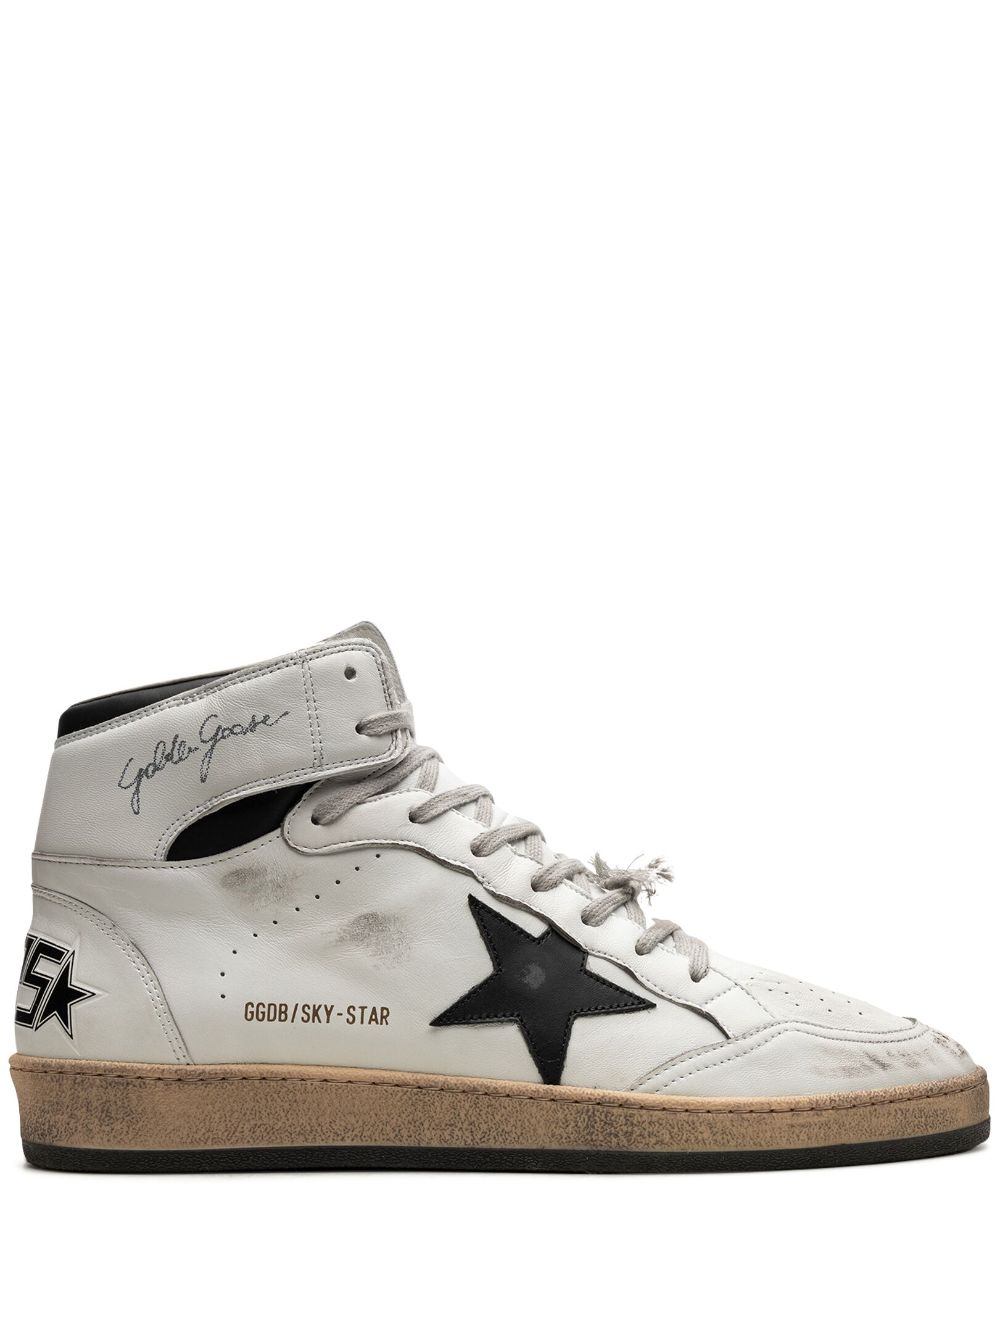 Golden Goose "Sky-Star ""Multi-Colour"" high-top sneakers" - Wit